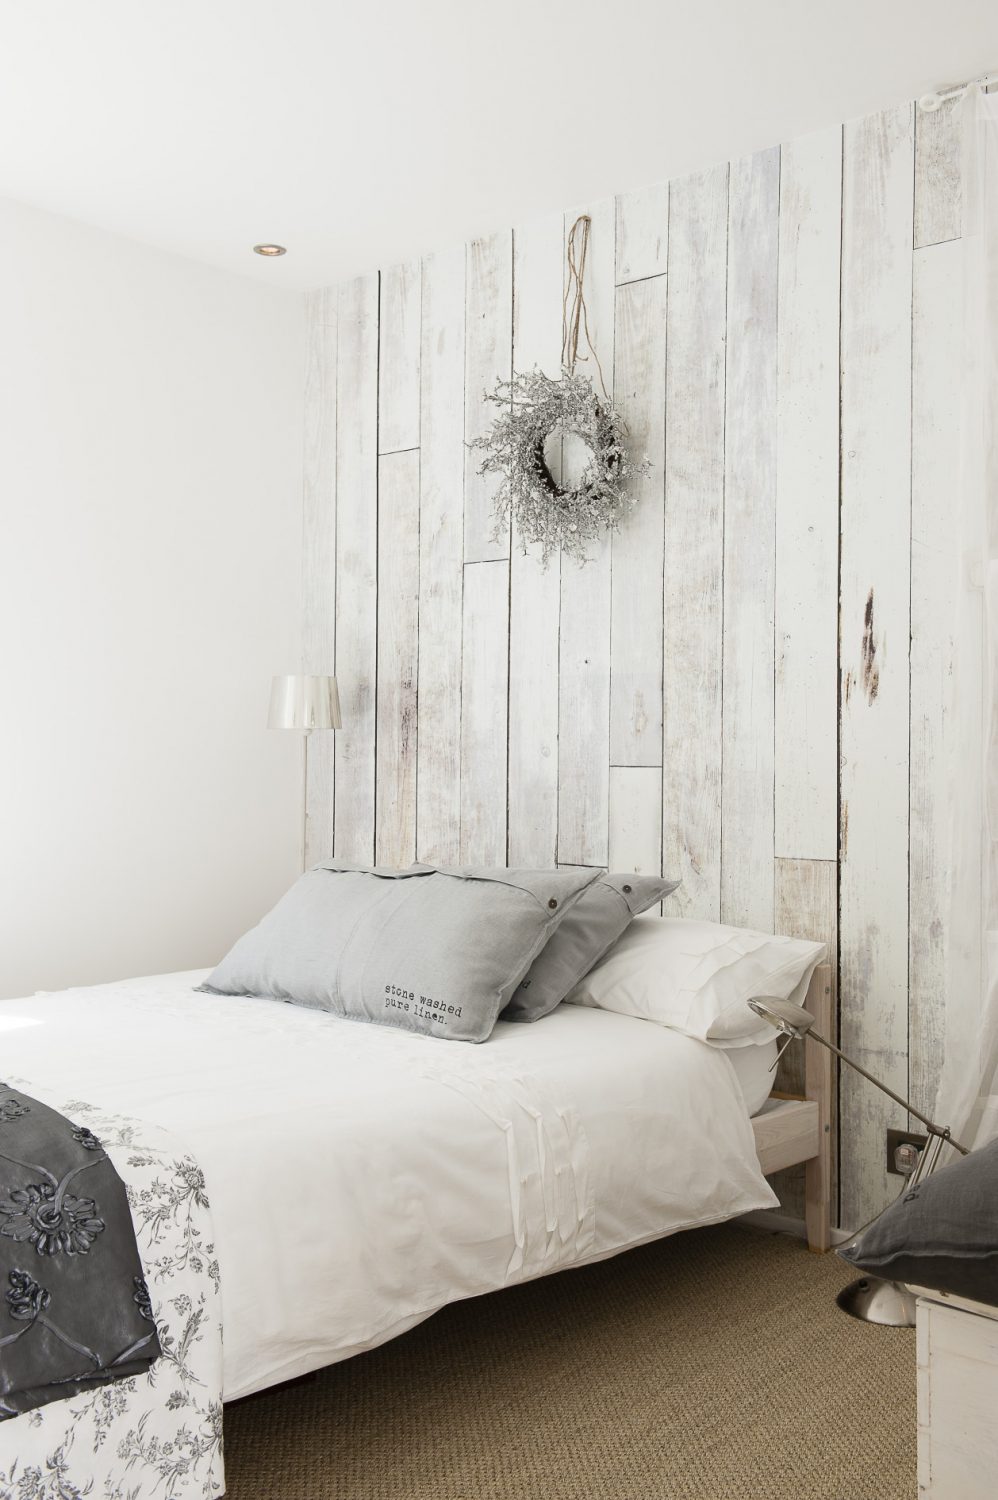 Wood panel effect wallpaper creates a trompe l’oeil on one wall of another guest room